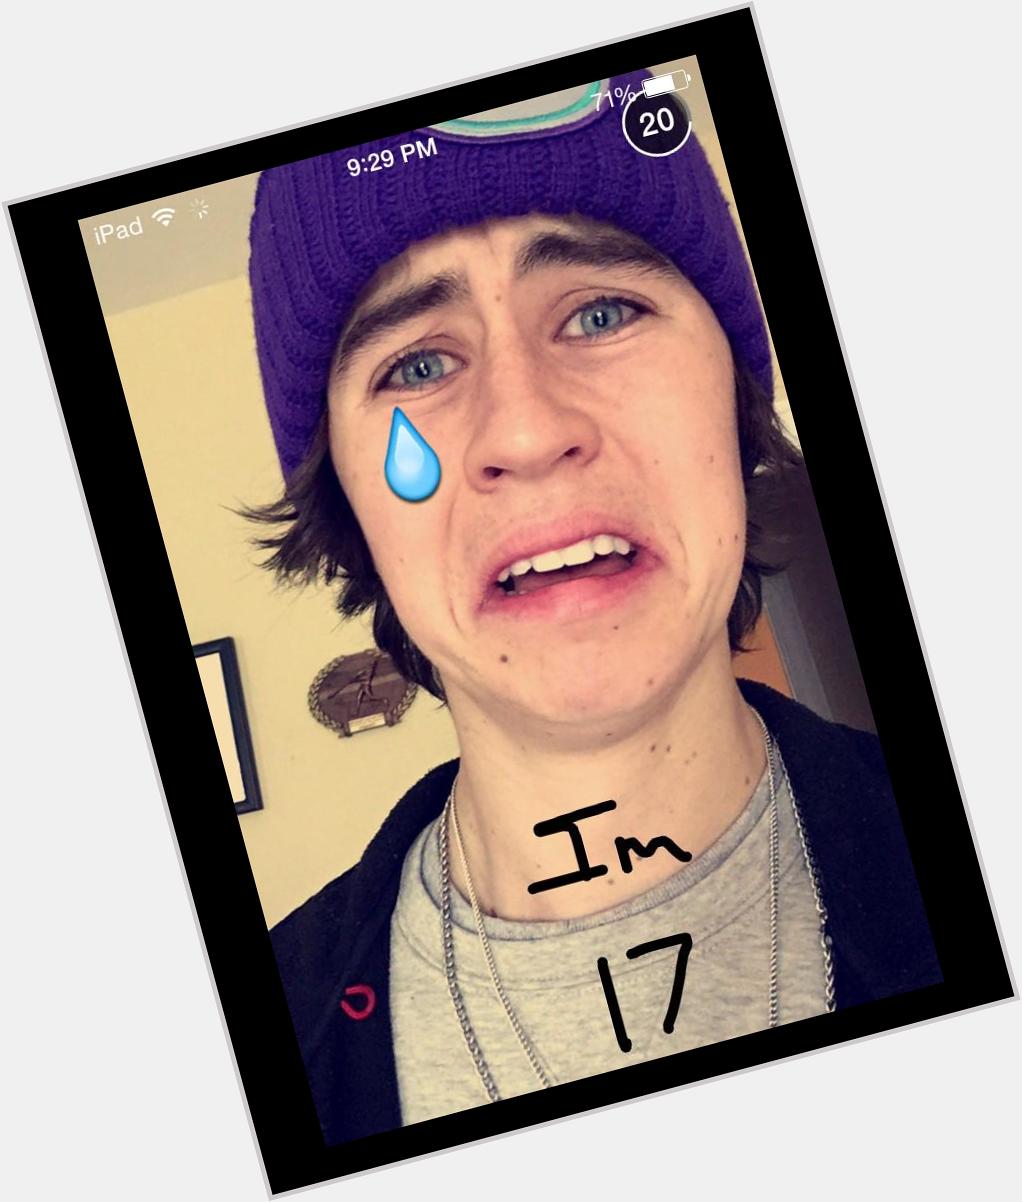 HAPPY BIRTHDAY TO THE PERSON WHO CHANGED MY LIFE! (Nash Grier)  